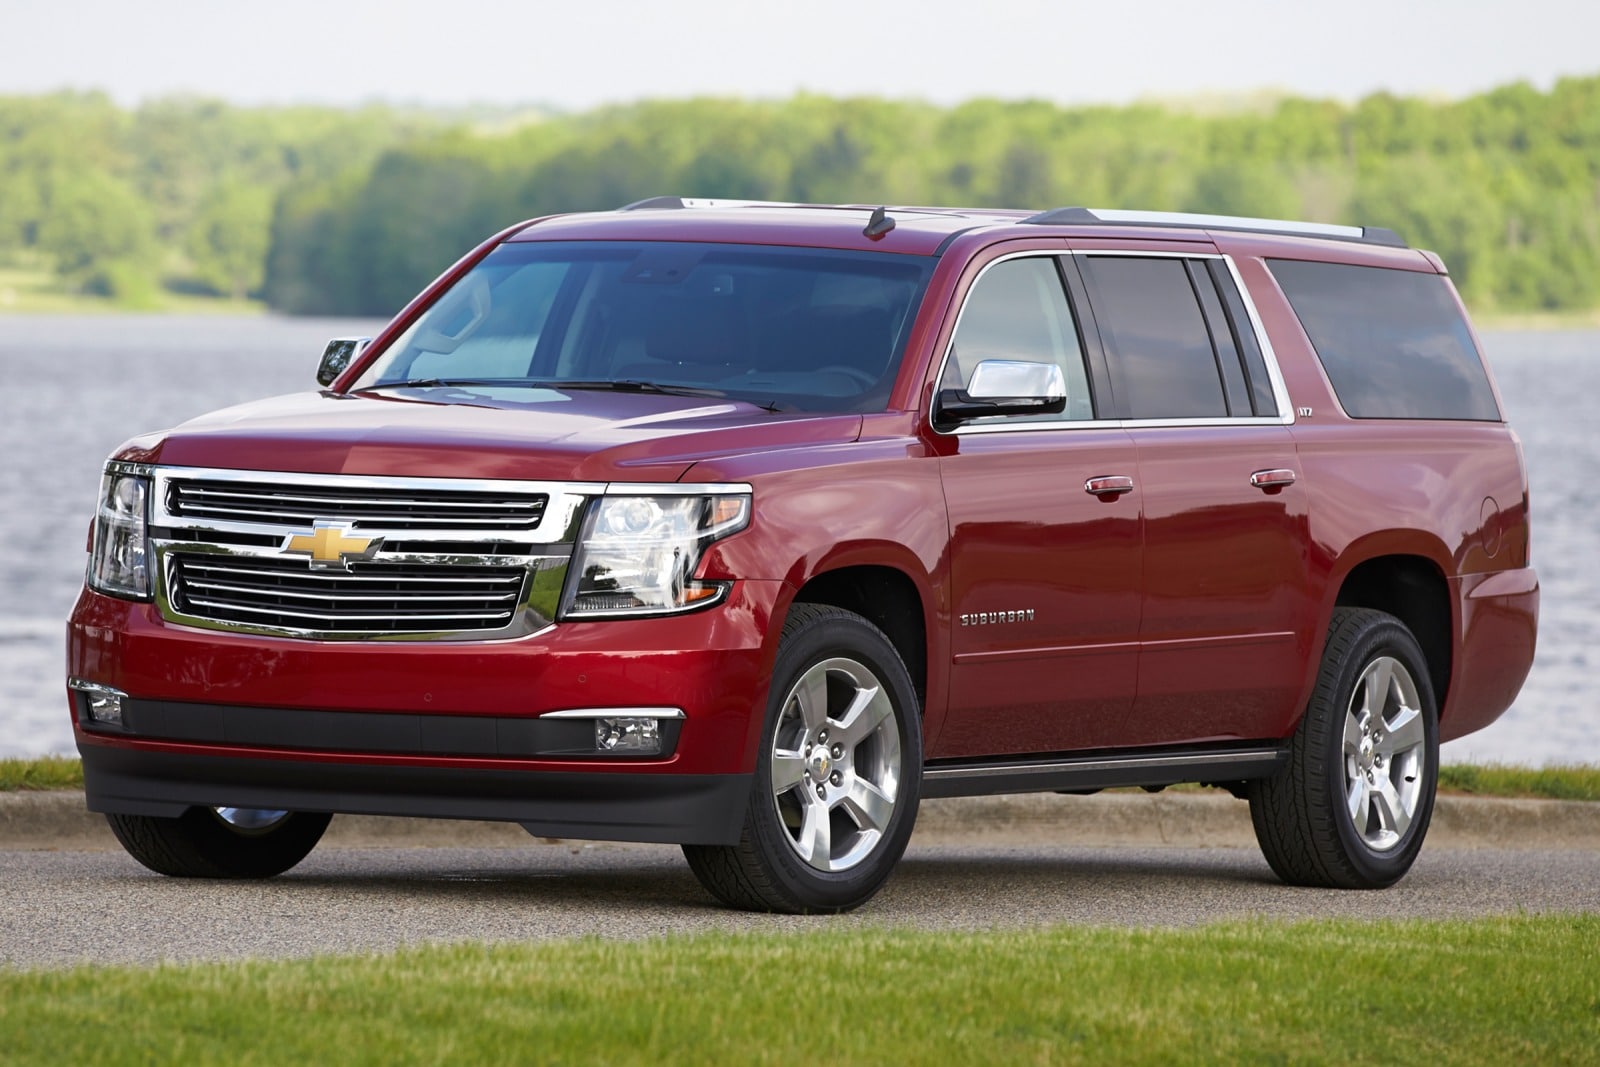 2015 Chevy Suburban Review & Ratings | Edmunds